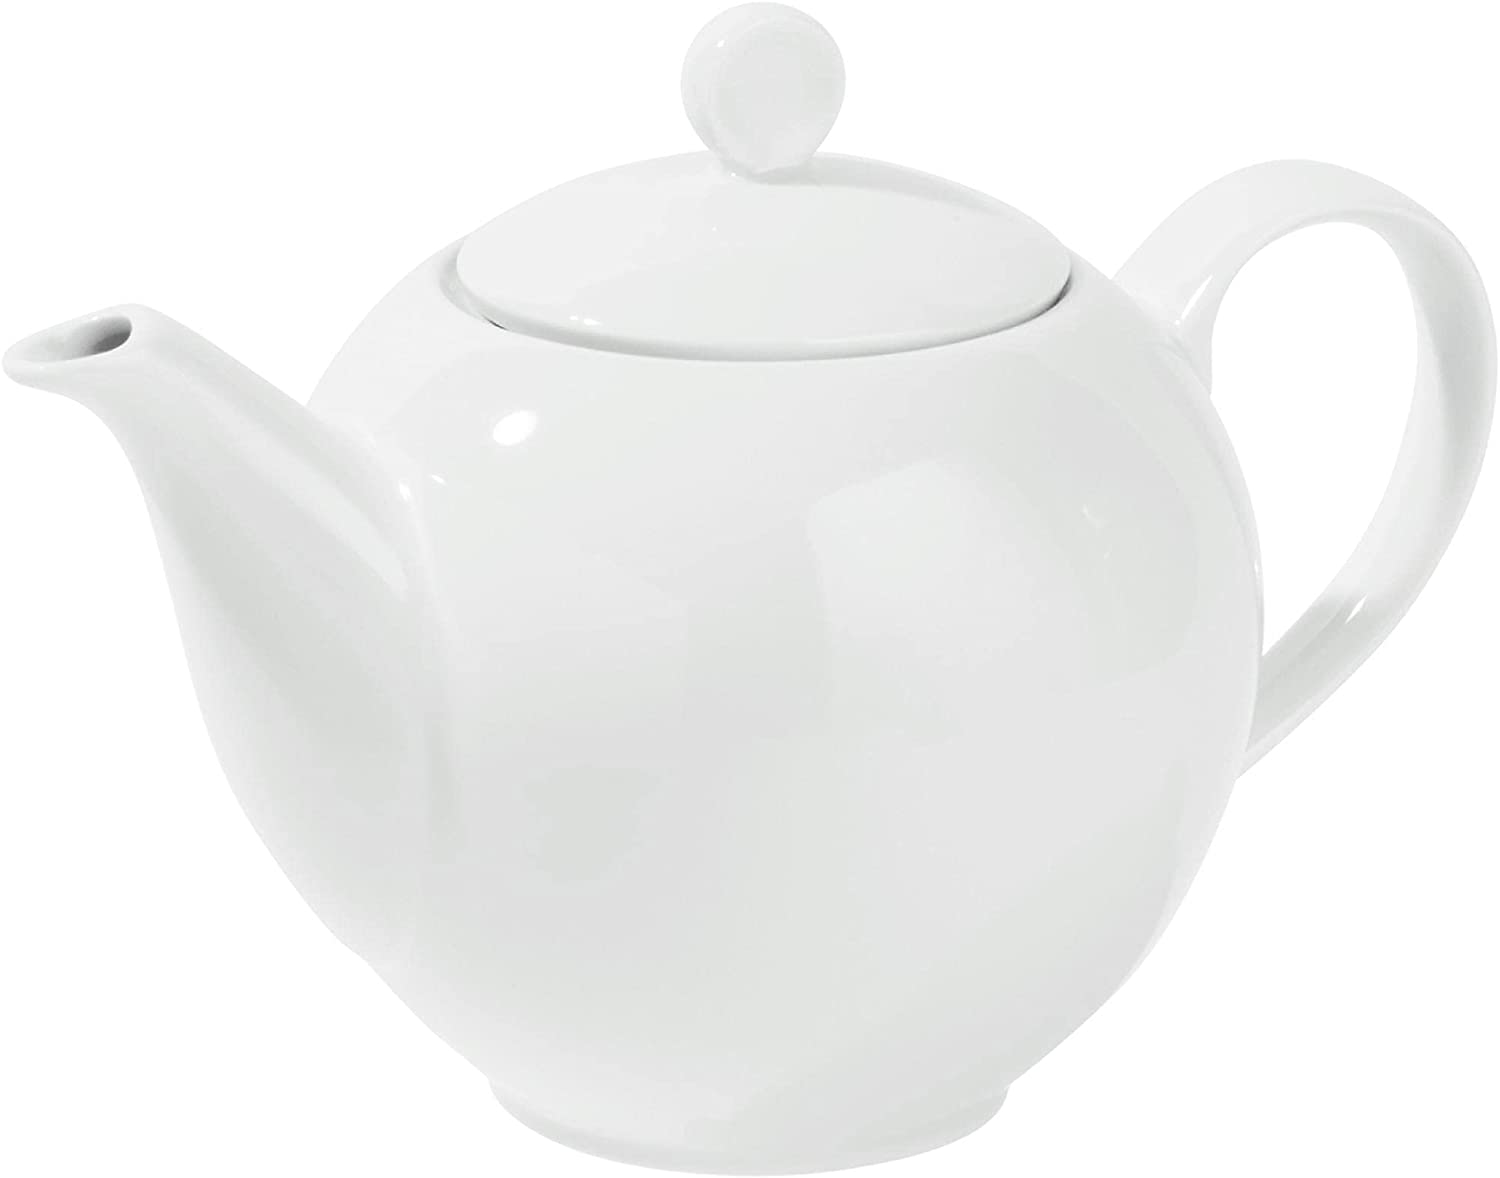 BUTLERS Puro Teapot 1300 ml Made of Quality Porcelain - White Porcelain Jug with Handle - High-Quality Tea Service